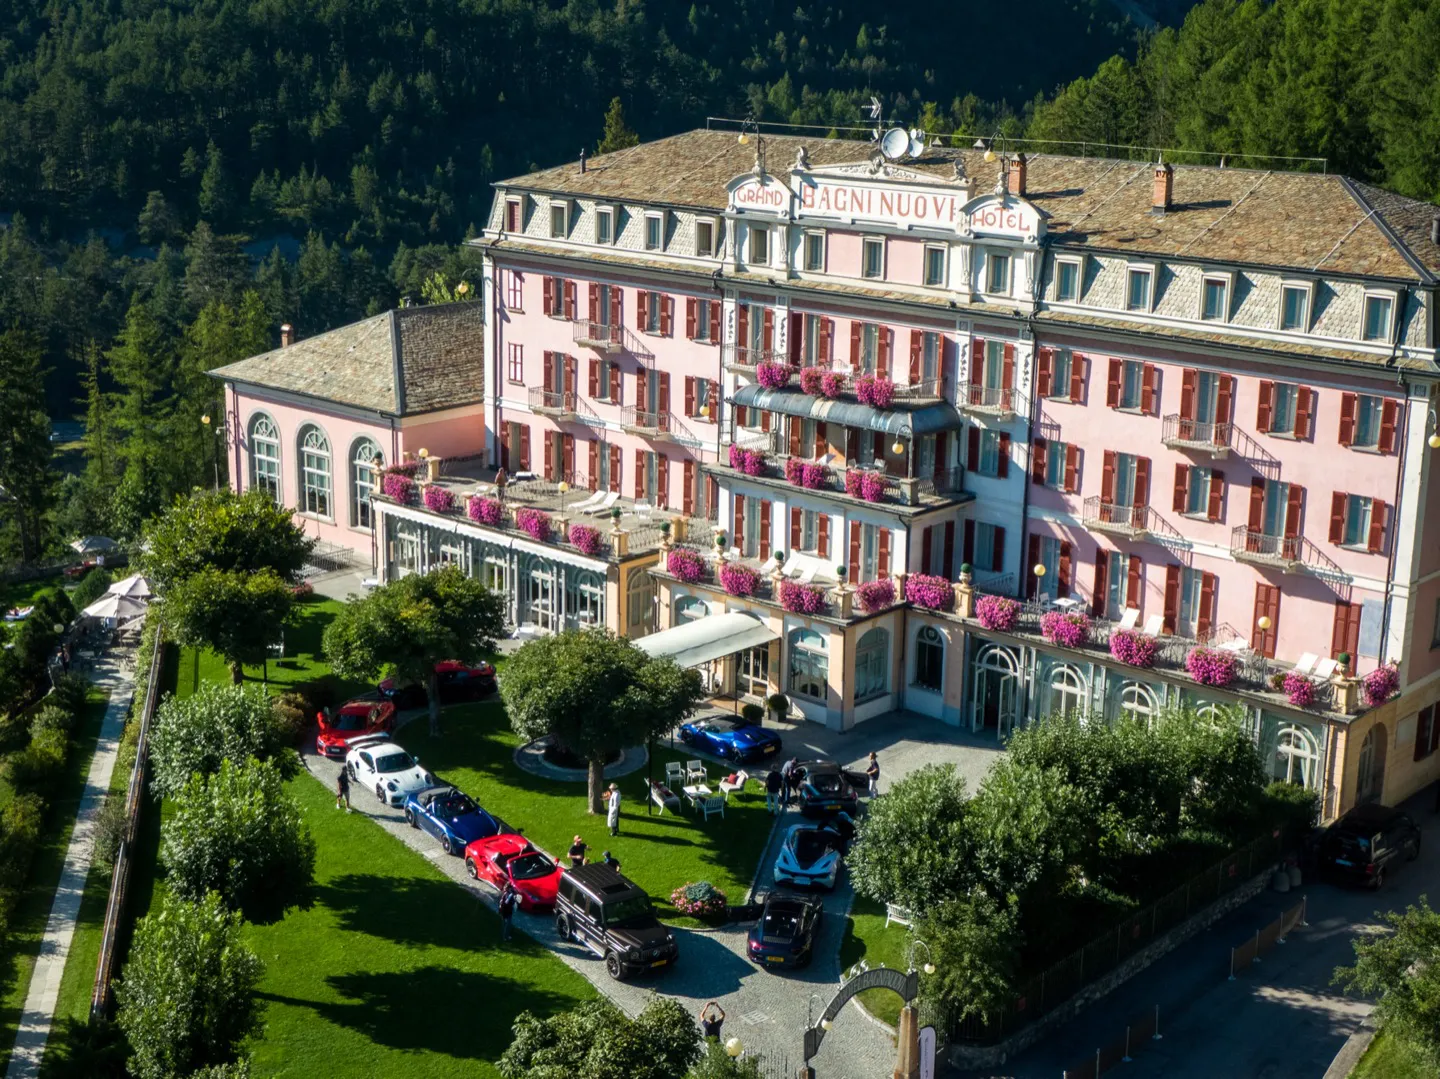 Stay in grand historic five-star hotels like Bagni Nuovi on a luxury holiday in Italy